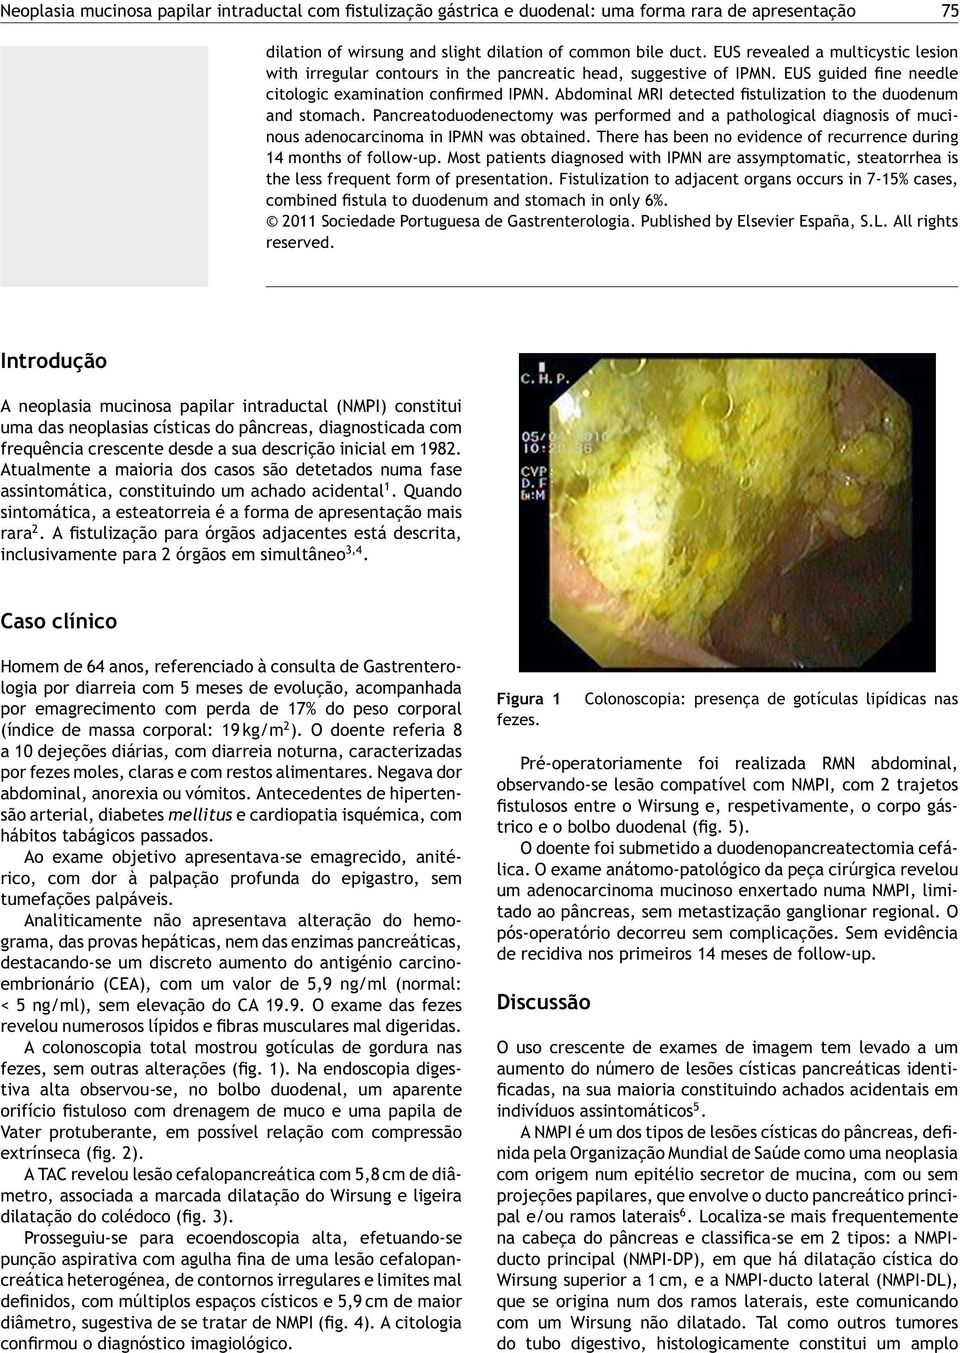 Abdominal MRI detected fistulization to the duodenum and stomach. Pancreatoduodenectomy was performed and a pathological diagnosis of mucinous adenocarcinoma in IPMN was obtained.